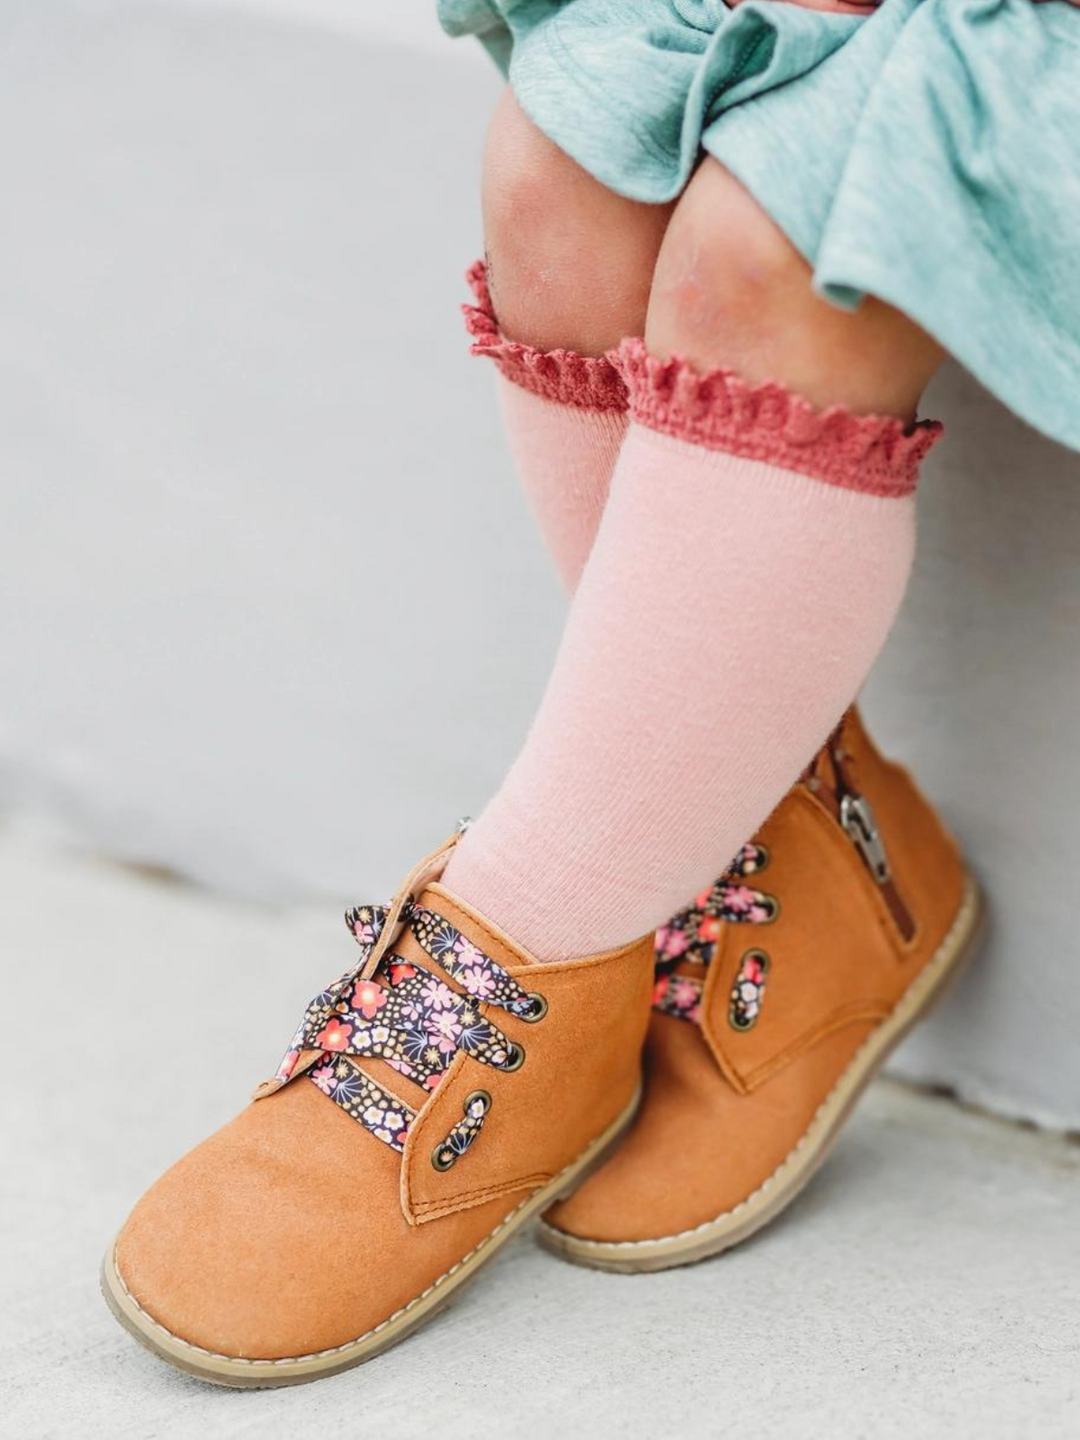 Lace Top Knee High Socks - Blush | Little Stocking Co.